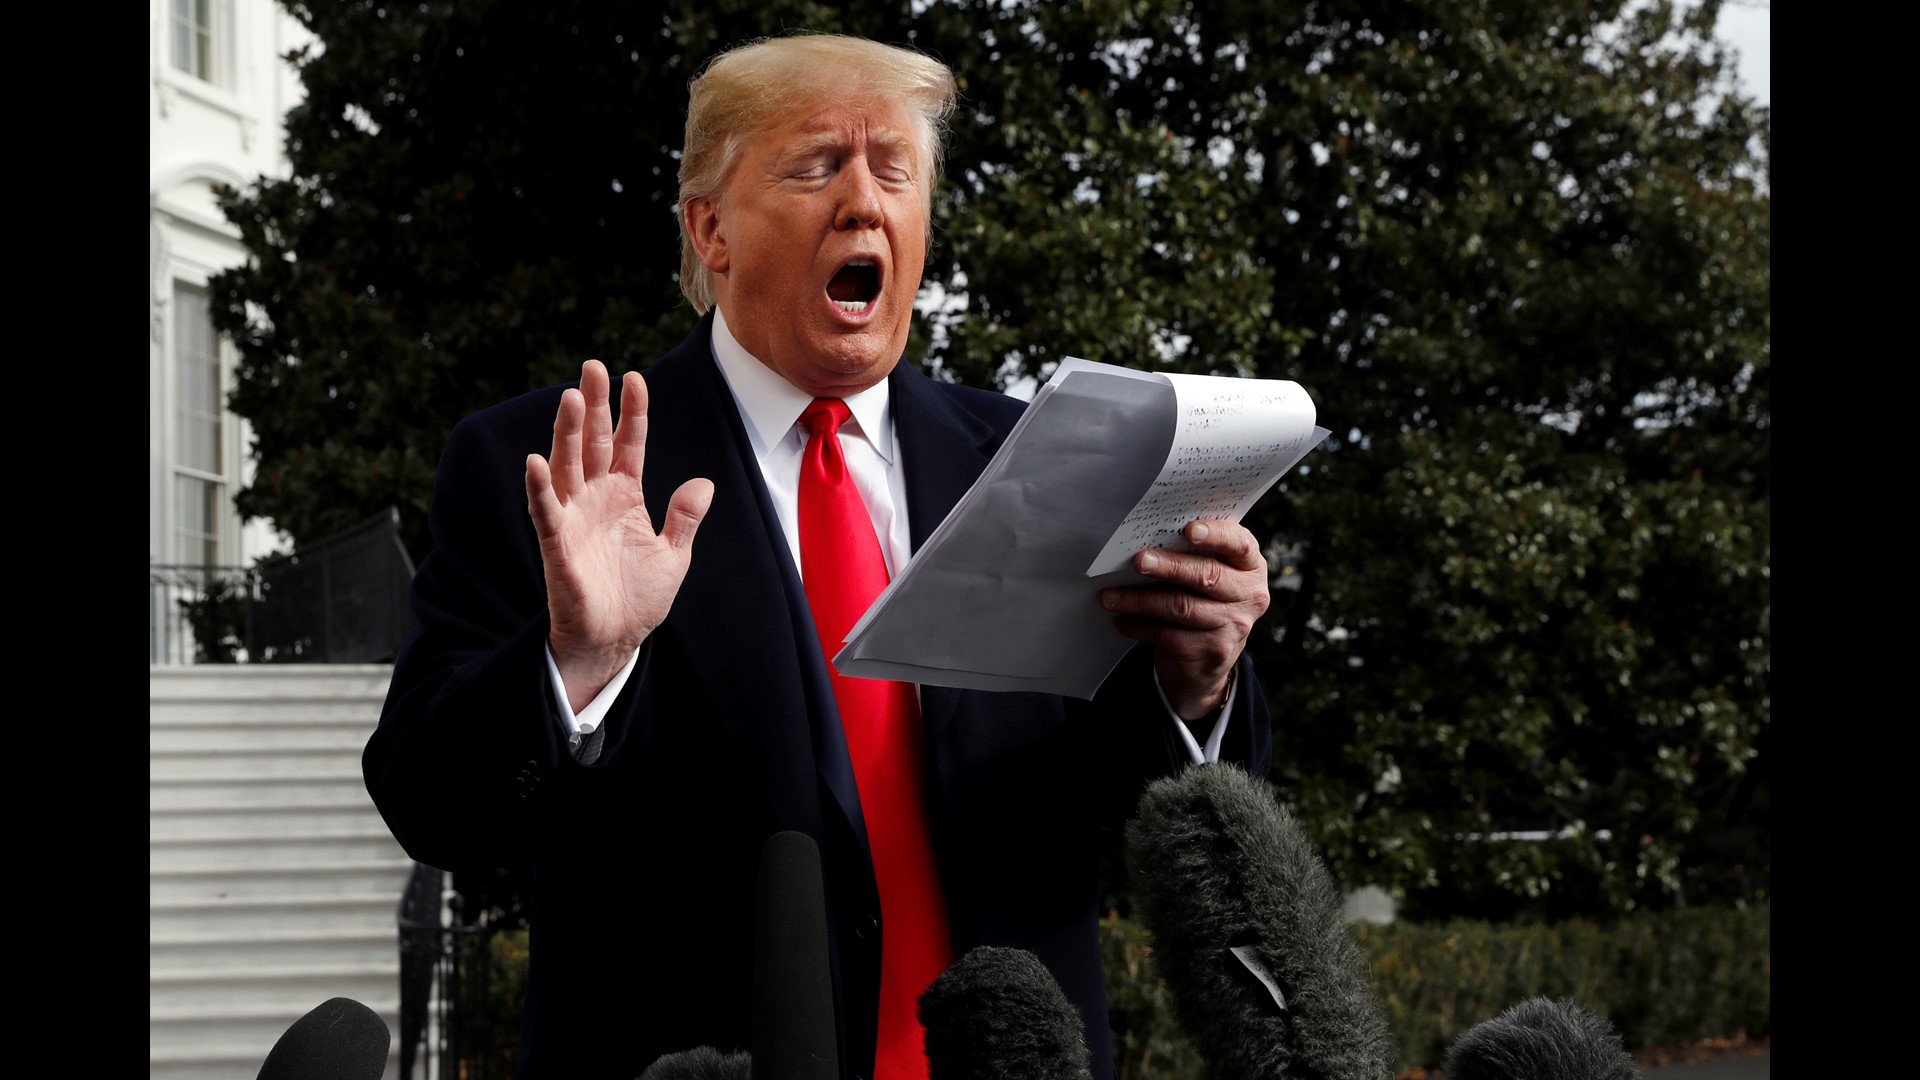 Following European Union Gordon Sondland’s impeachment testimony , President Donald Trump held a presser claiming he did not want anything from Ukraine.